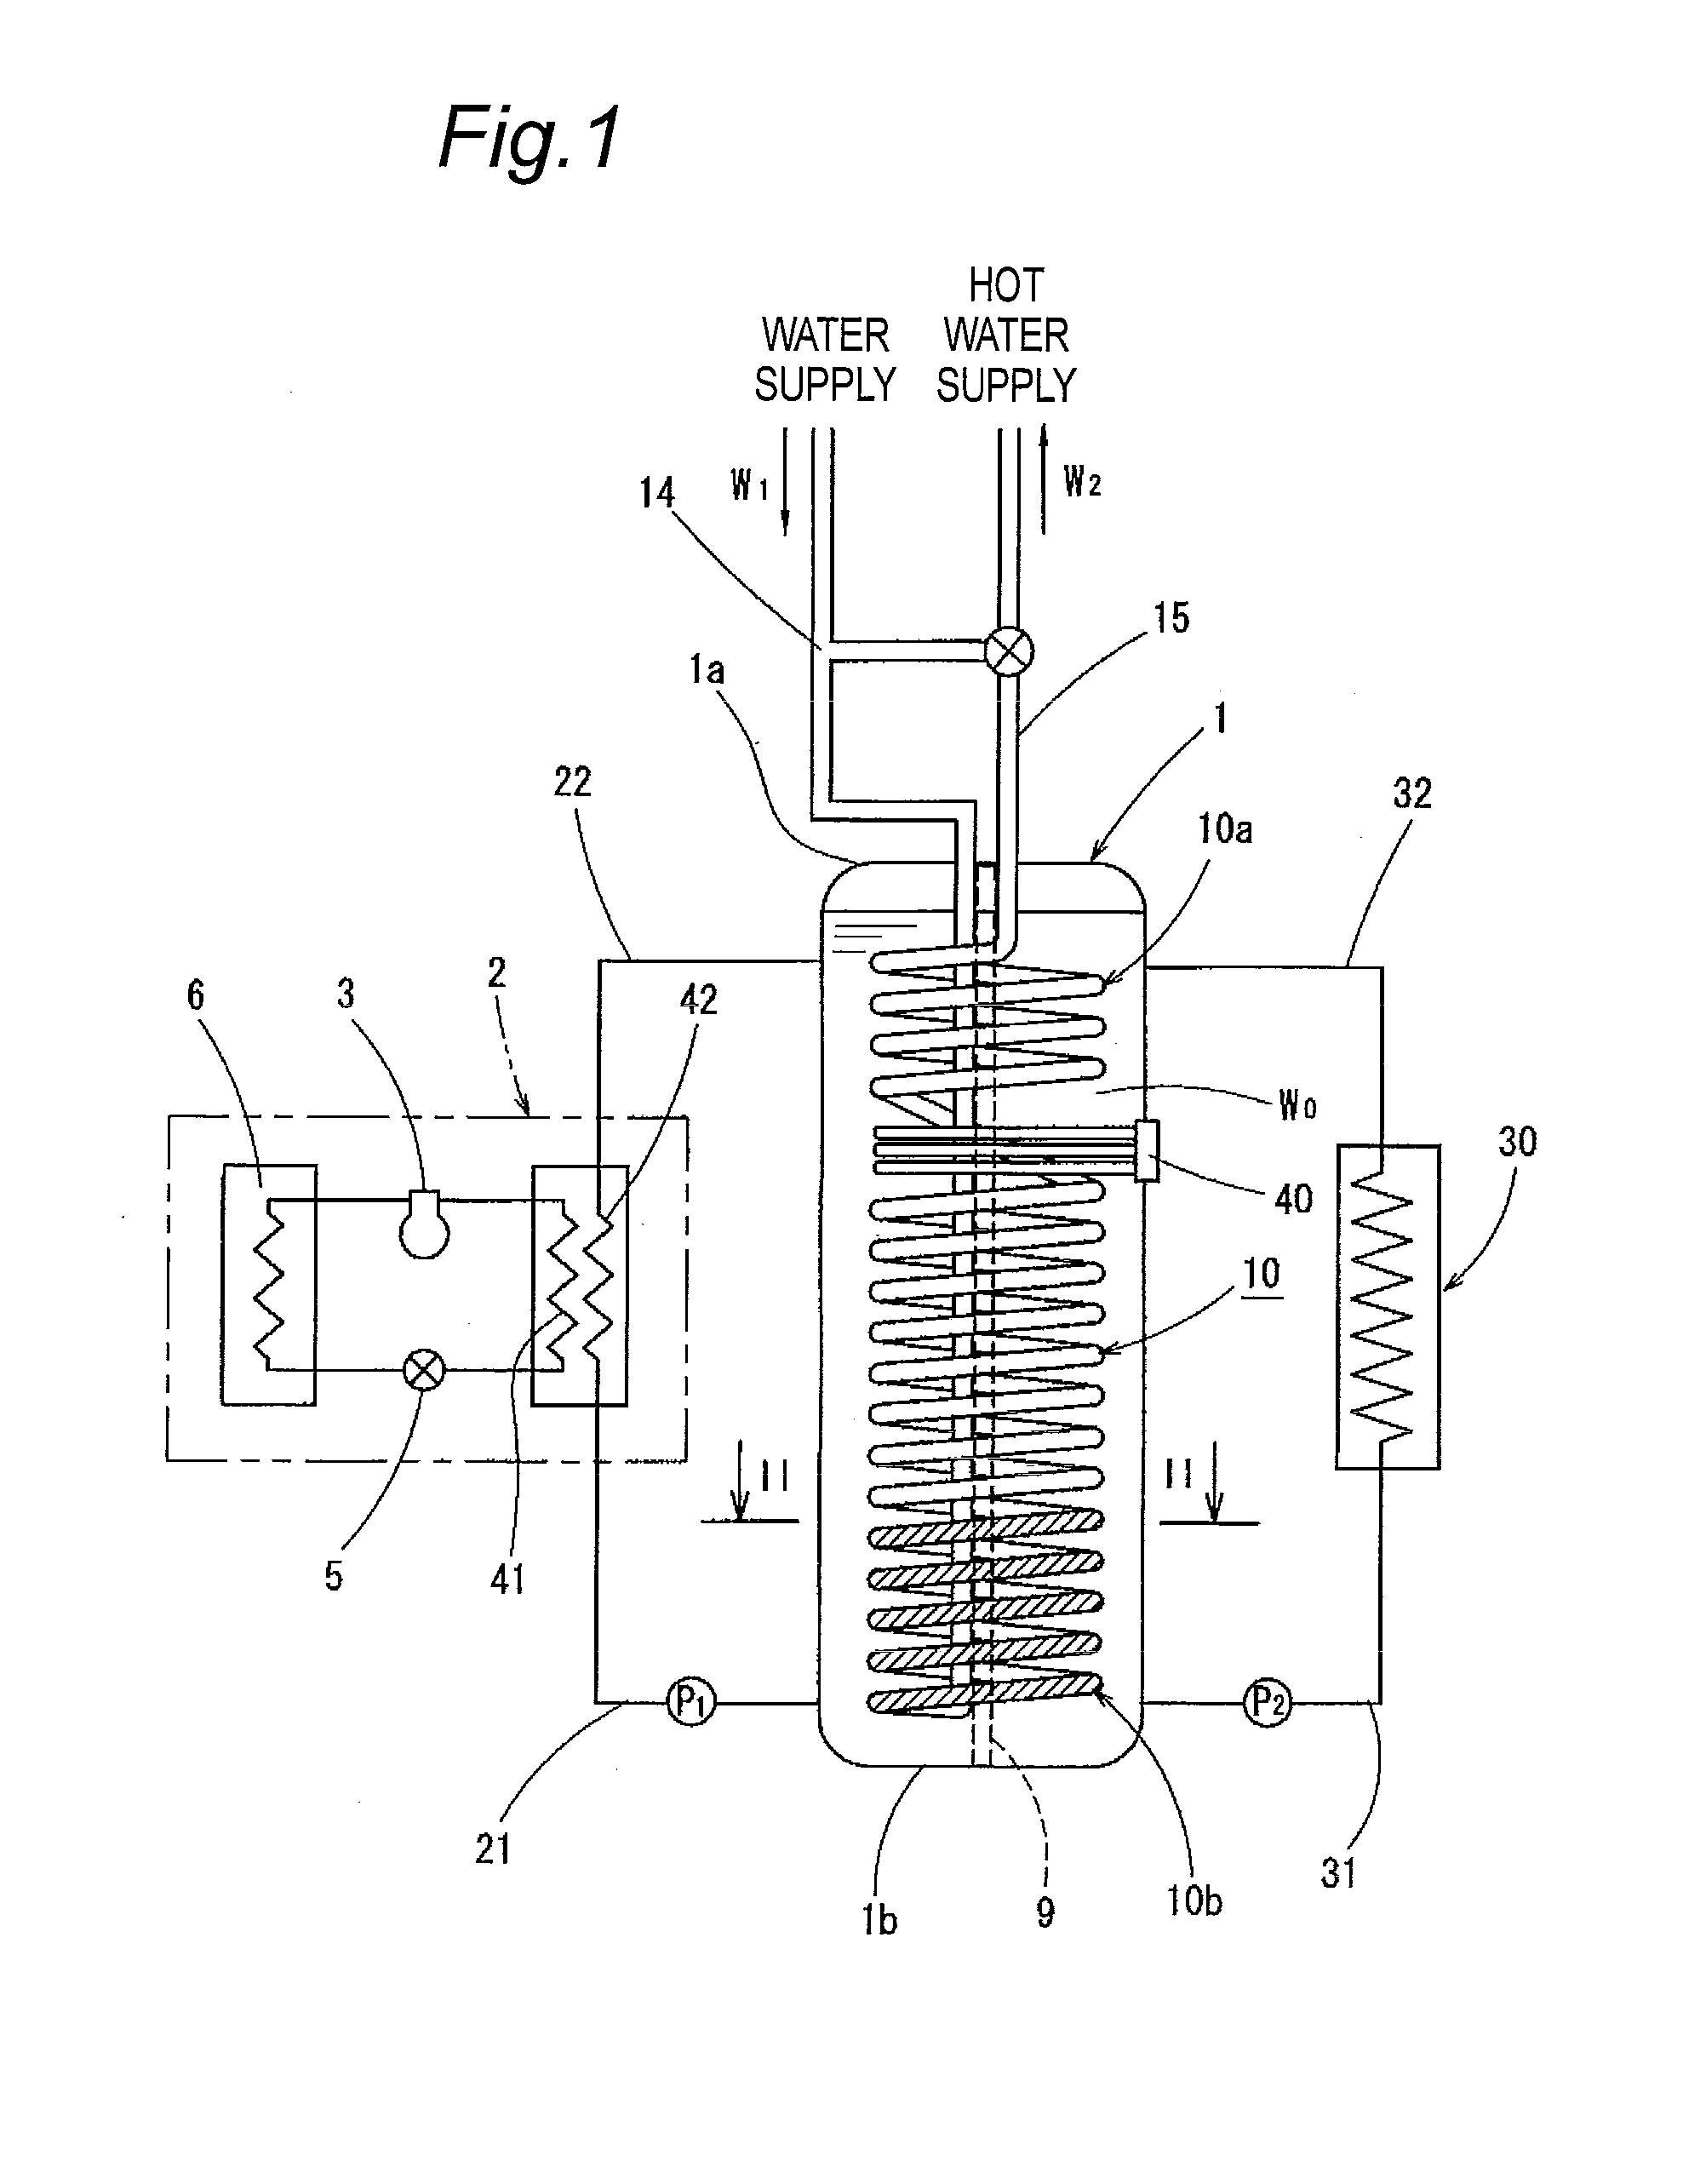 Heat pump type hot water supply apparatus and heating and hot water supply apparatus